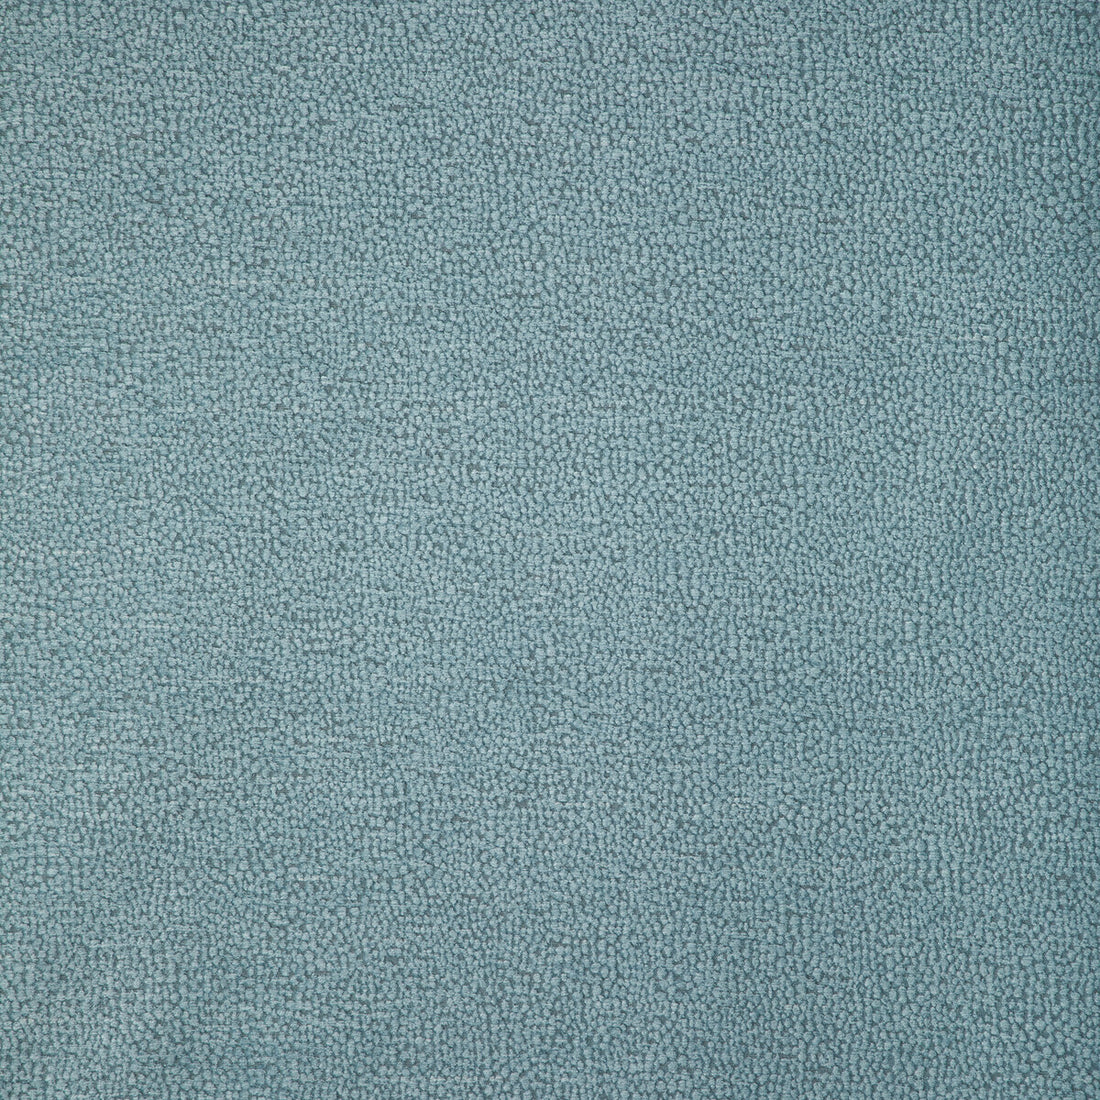 Mulford fabric in lagoon color - pattern 37052.5.0 - by Kravet Design in the Thom Filicia Latitude collection